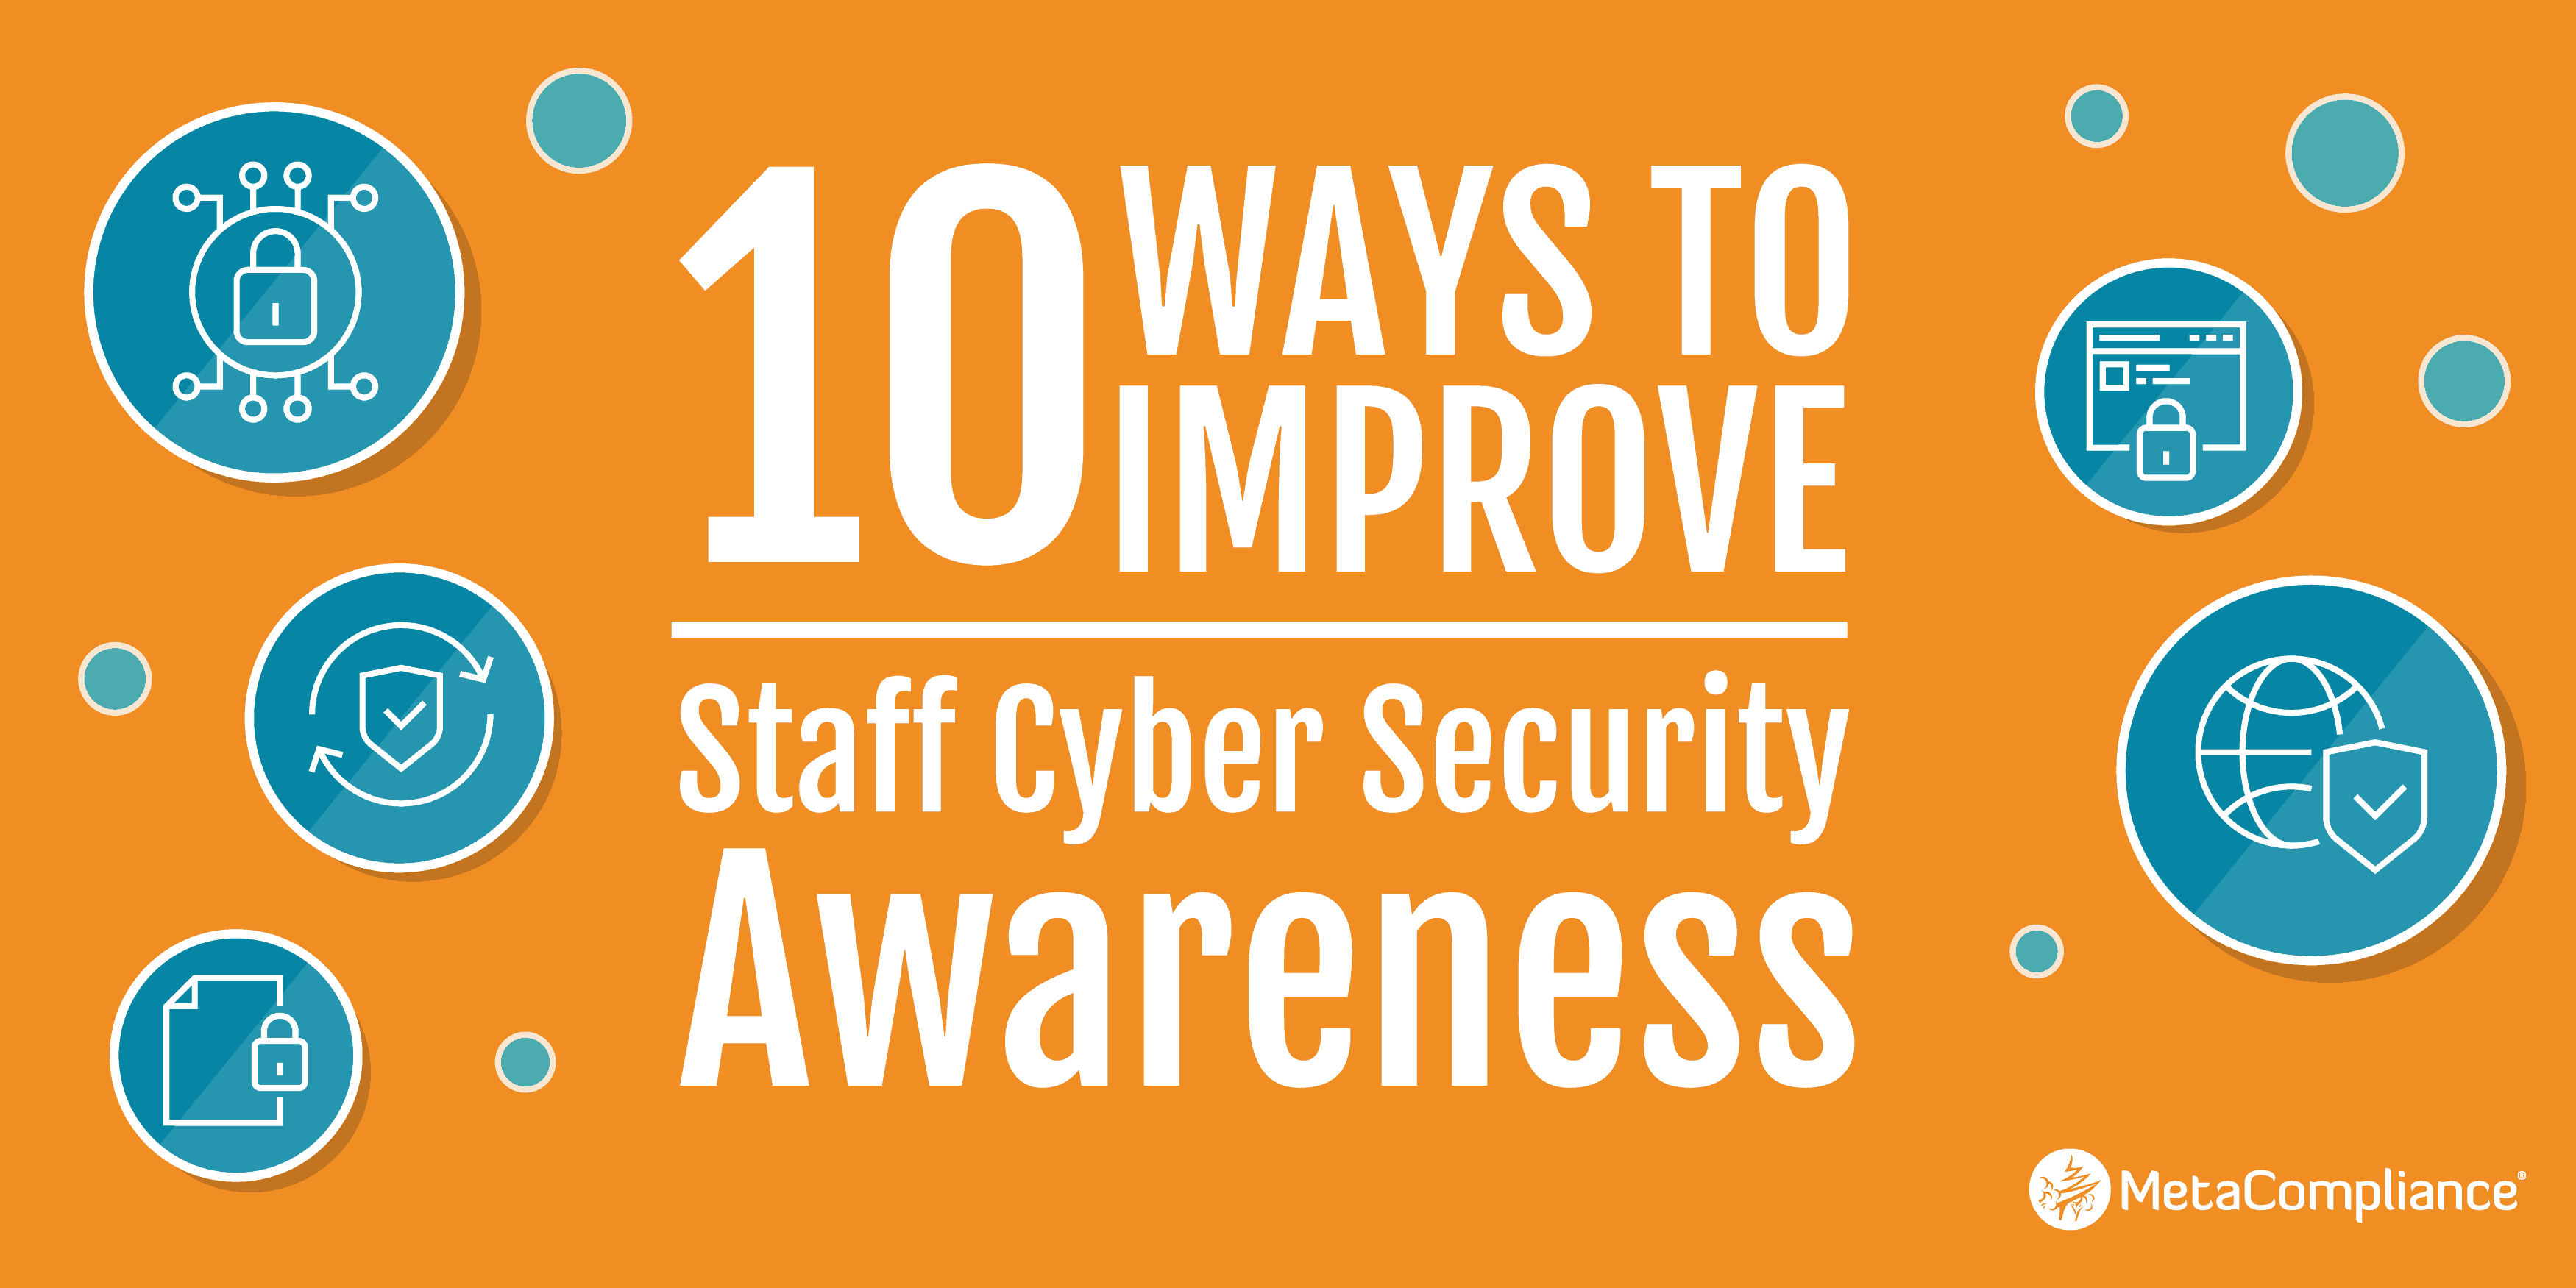 10 Ways To Improve Staff Cyber Security Awareness | MetaCompliance